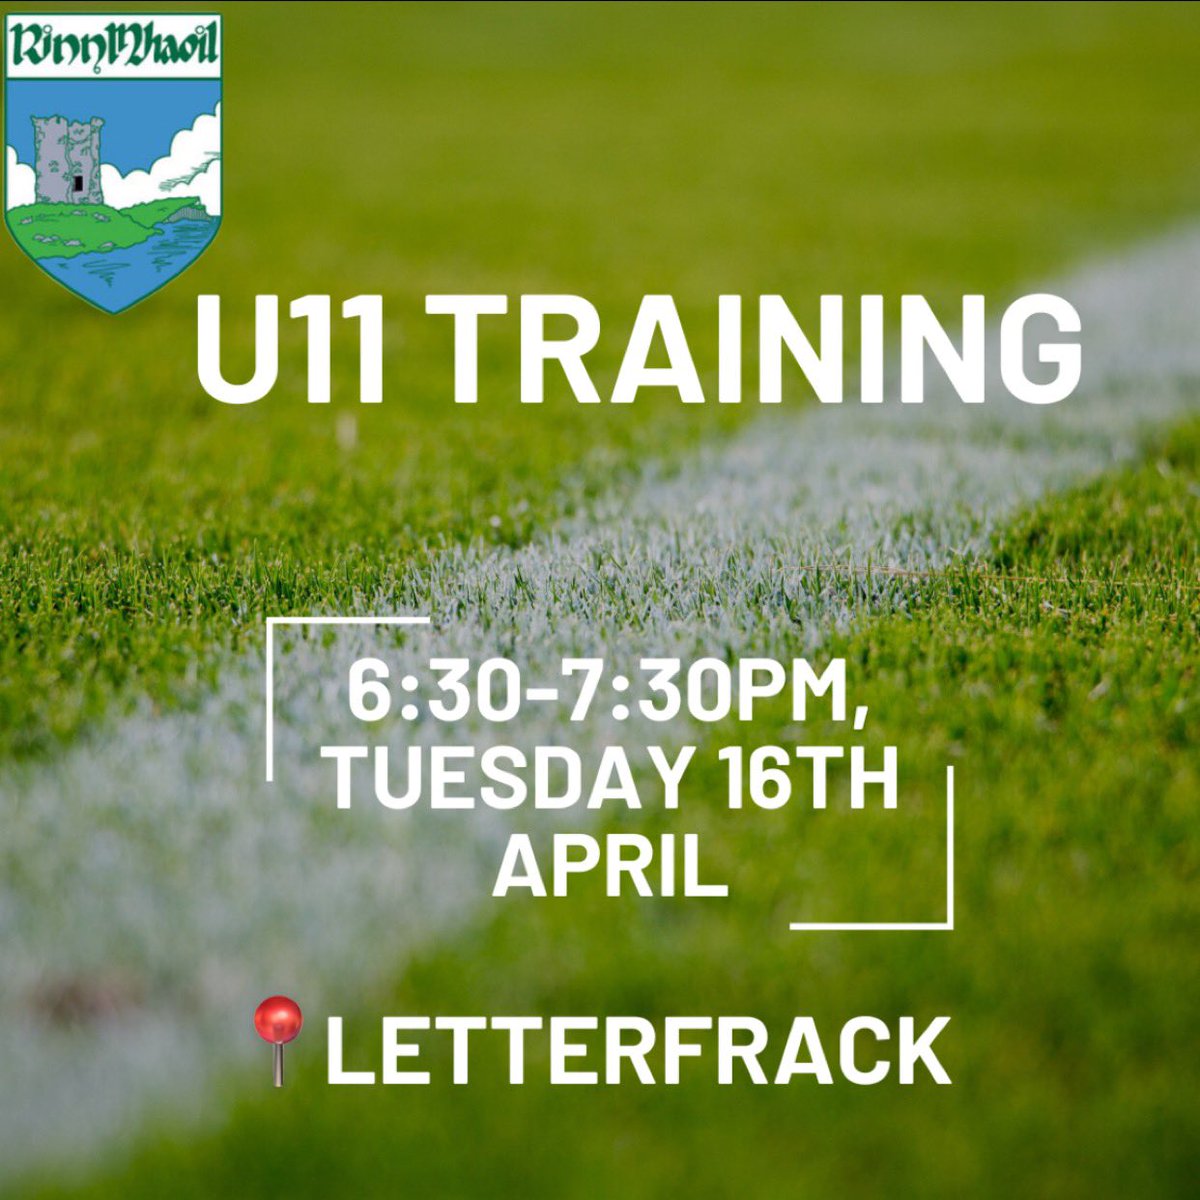 U11 training begins Tuesday, the 16th of April from 6:30-7:30 in Letterfrack. Both boys and girls born in 2013 and 2014 are welcome!